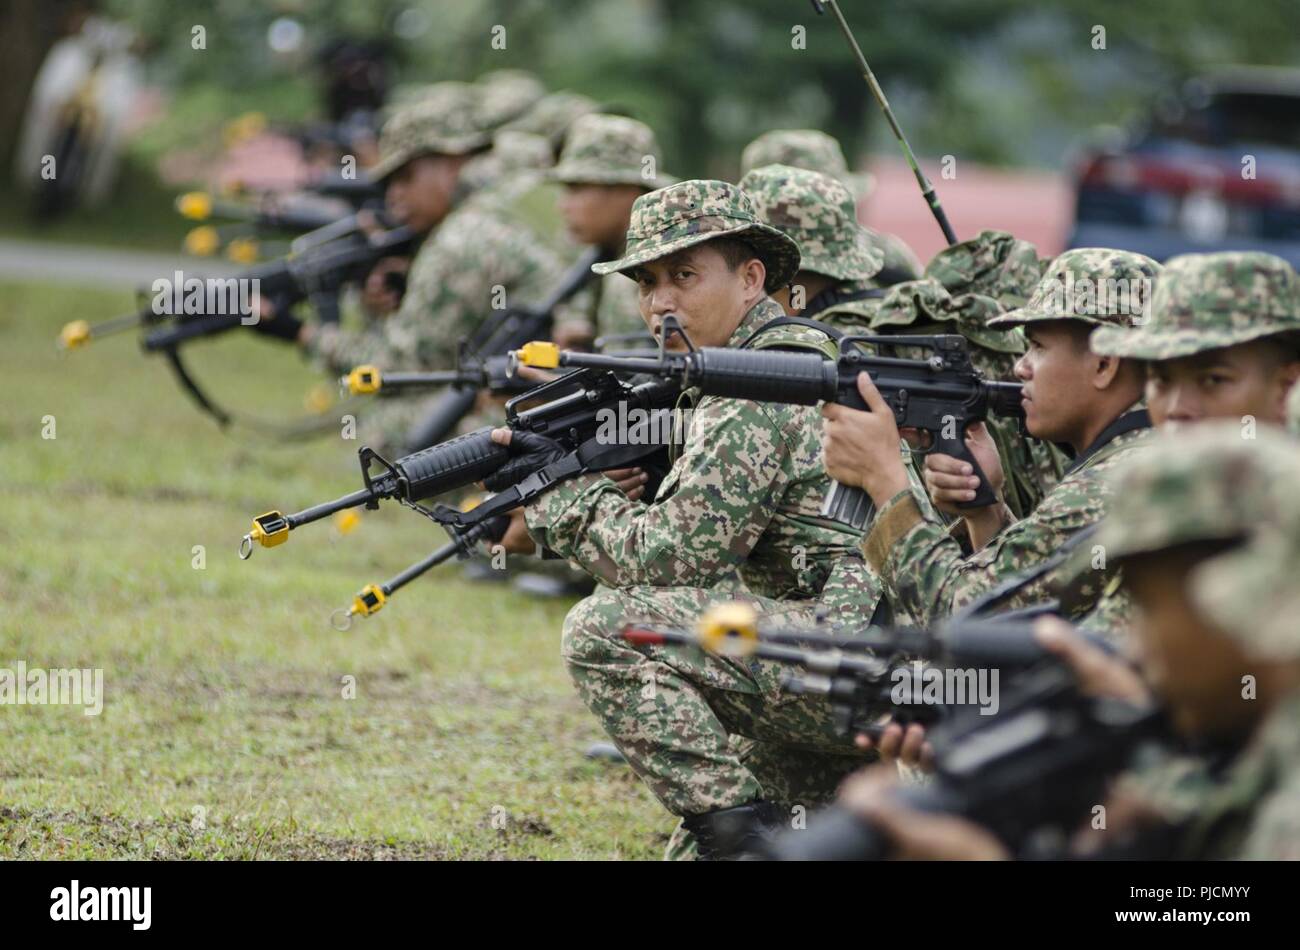 A Soldier With The 15th Royal Malay Regiment Prepare To Simulate Jungle Movements During Exercise Keris Strike July 24 2018 Camp Senawang Malaysia Malaysian Soldiers Were Demonstrating Their Jungle Tactics In Preparation